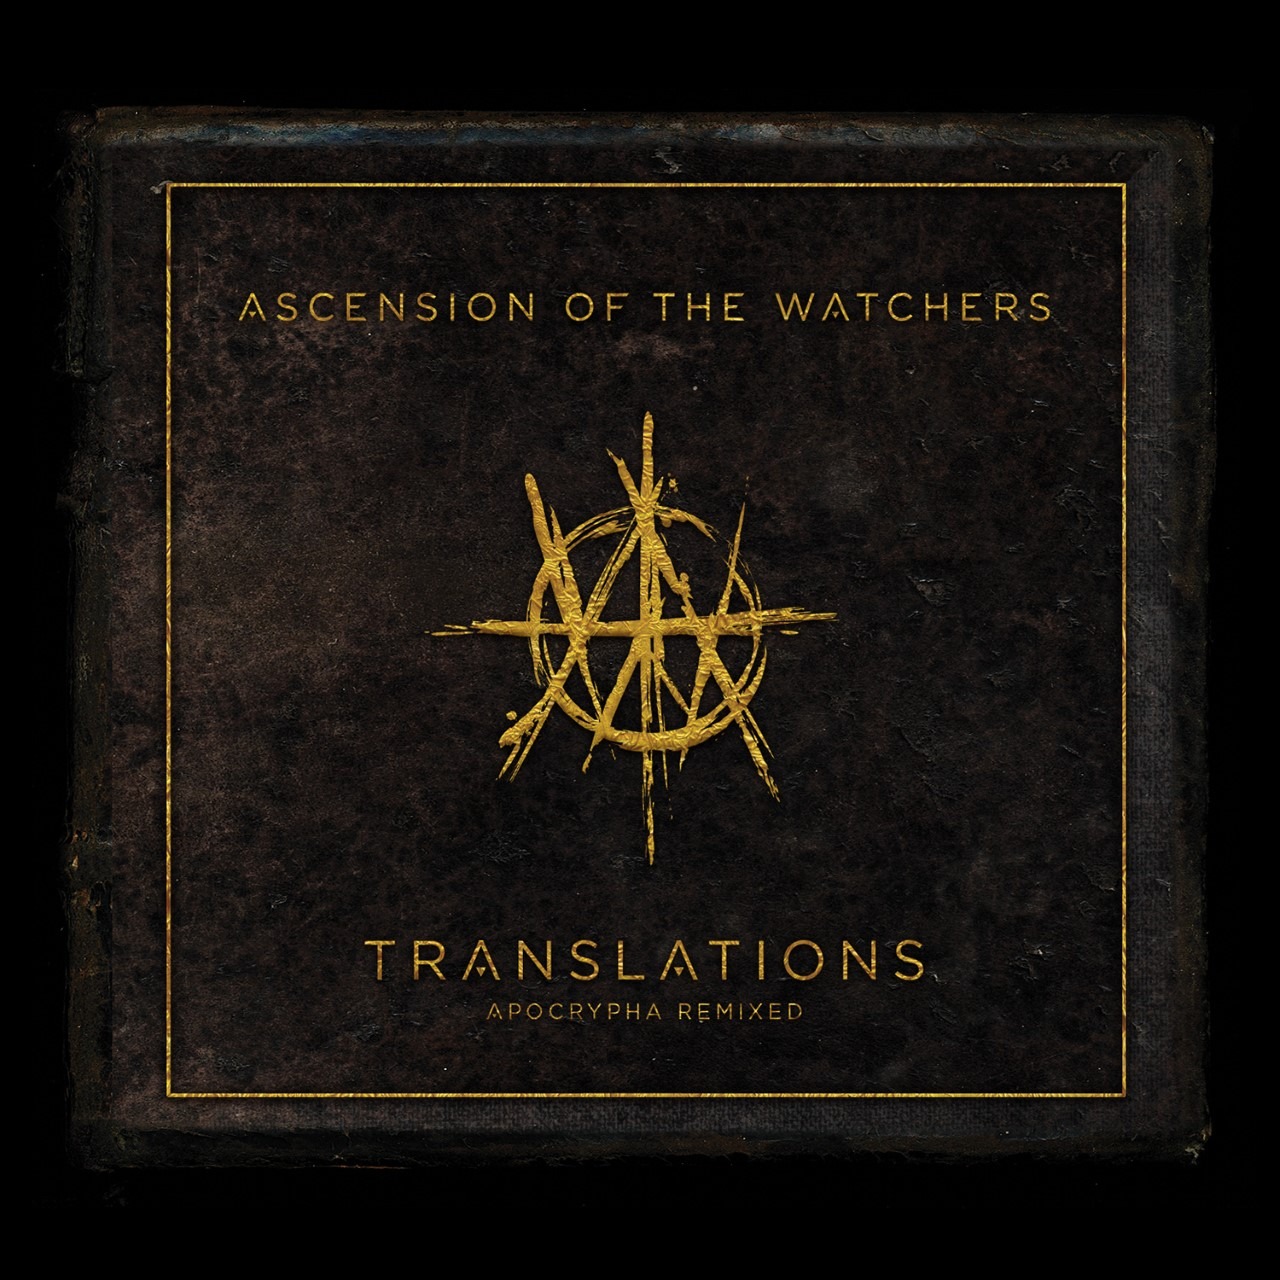 Ascension of the Watchers – Translations: Apocrypha Remixed (Cherry Red)